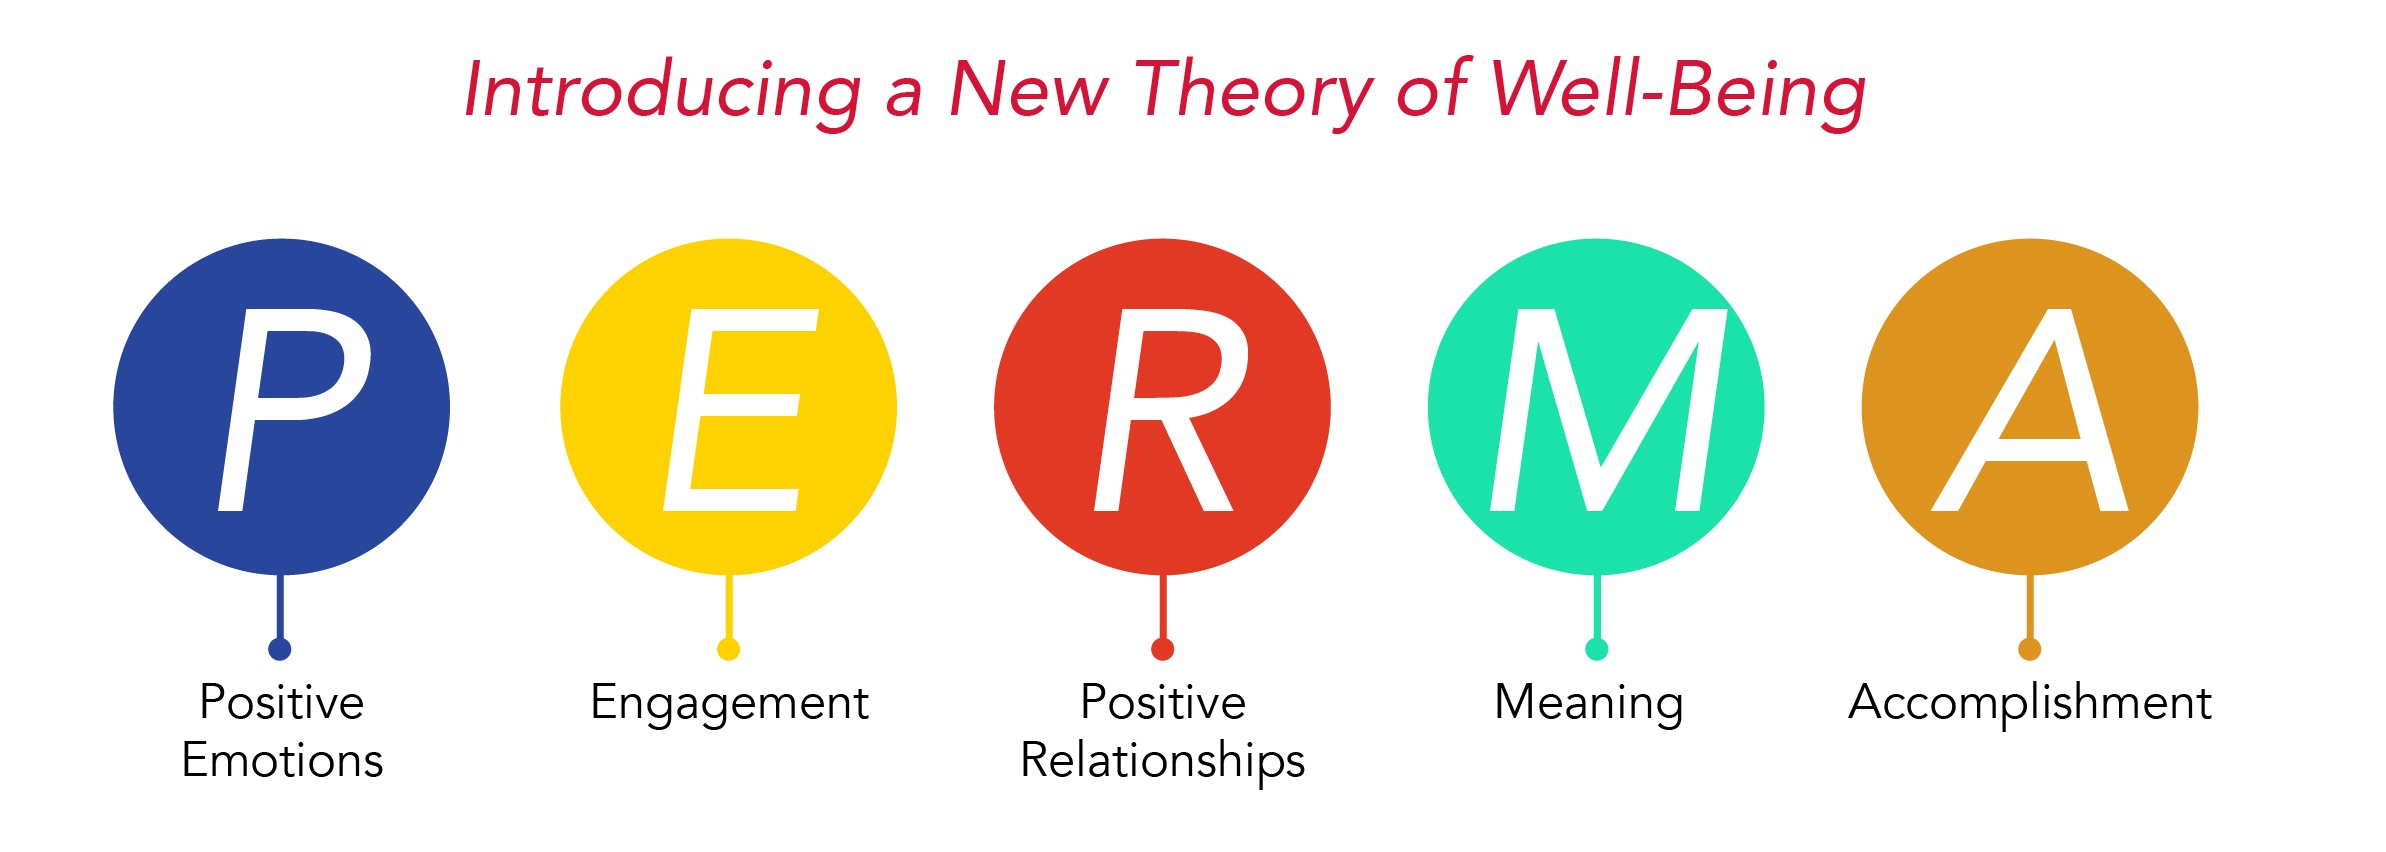 Martin Seligman Introducing a New Theory of Well-Being